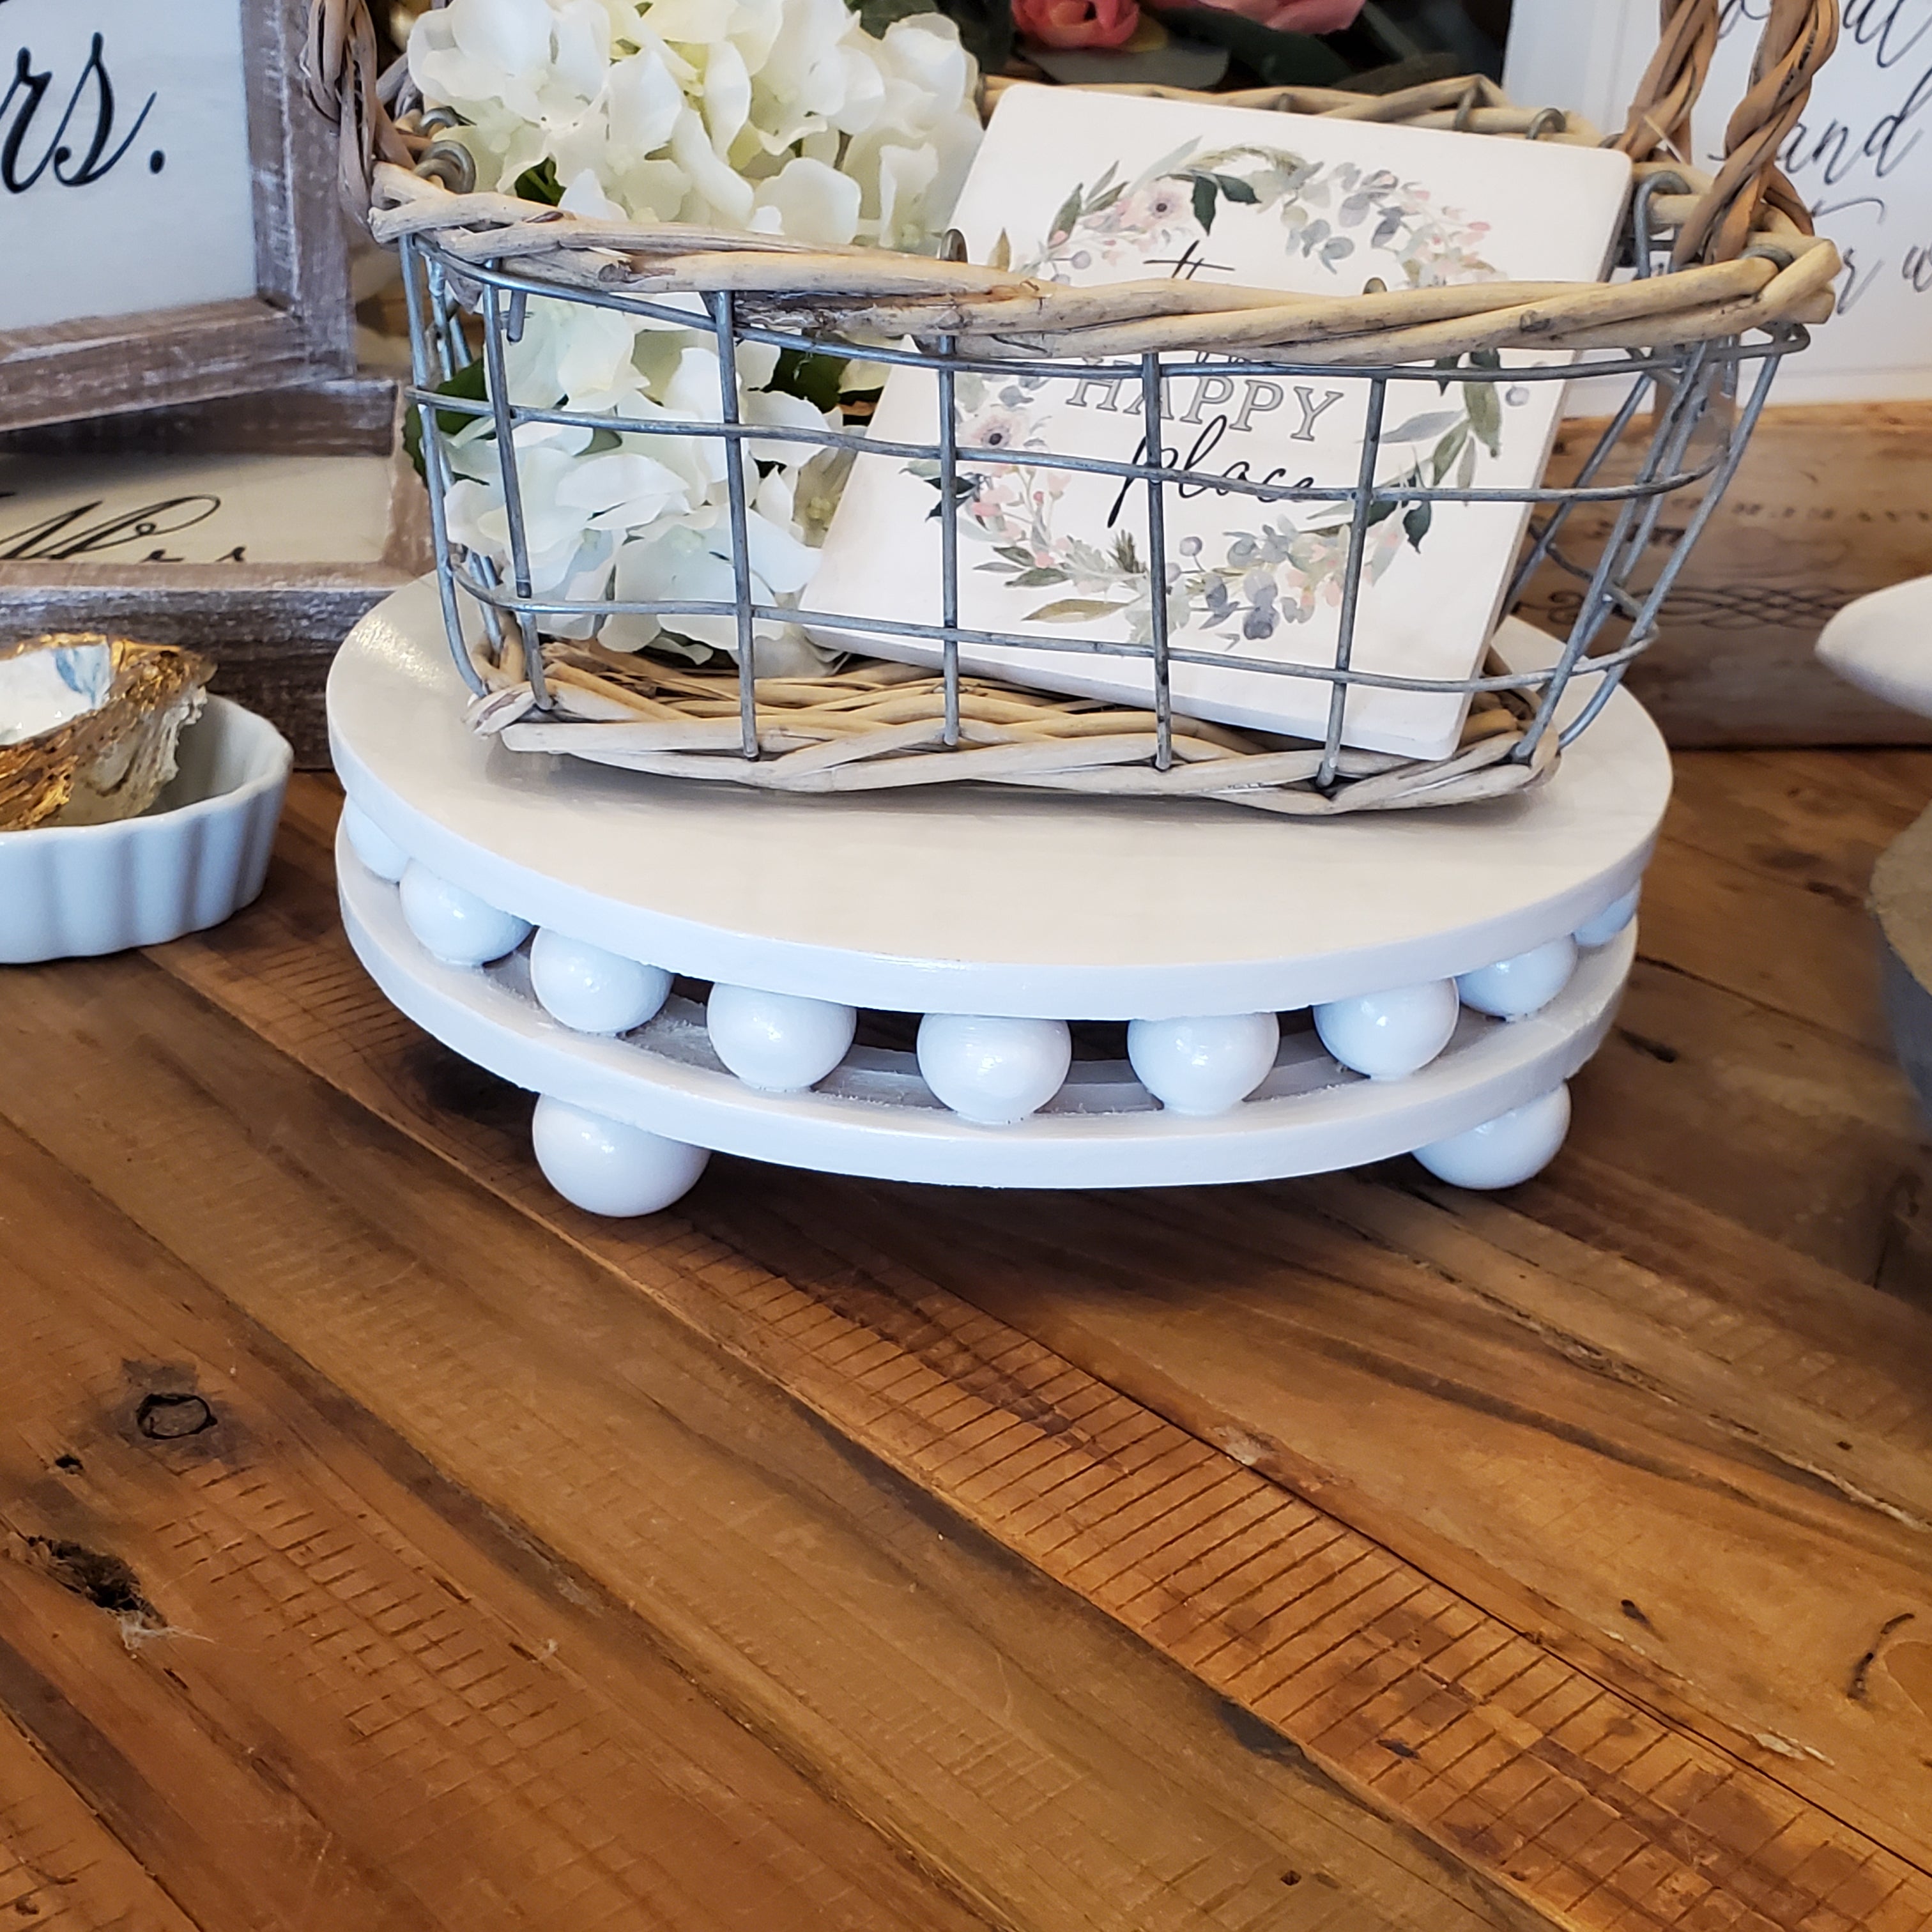 Antiqued Metal Folding Tray Table